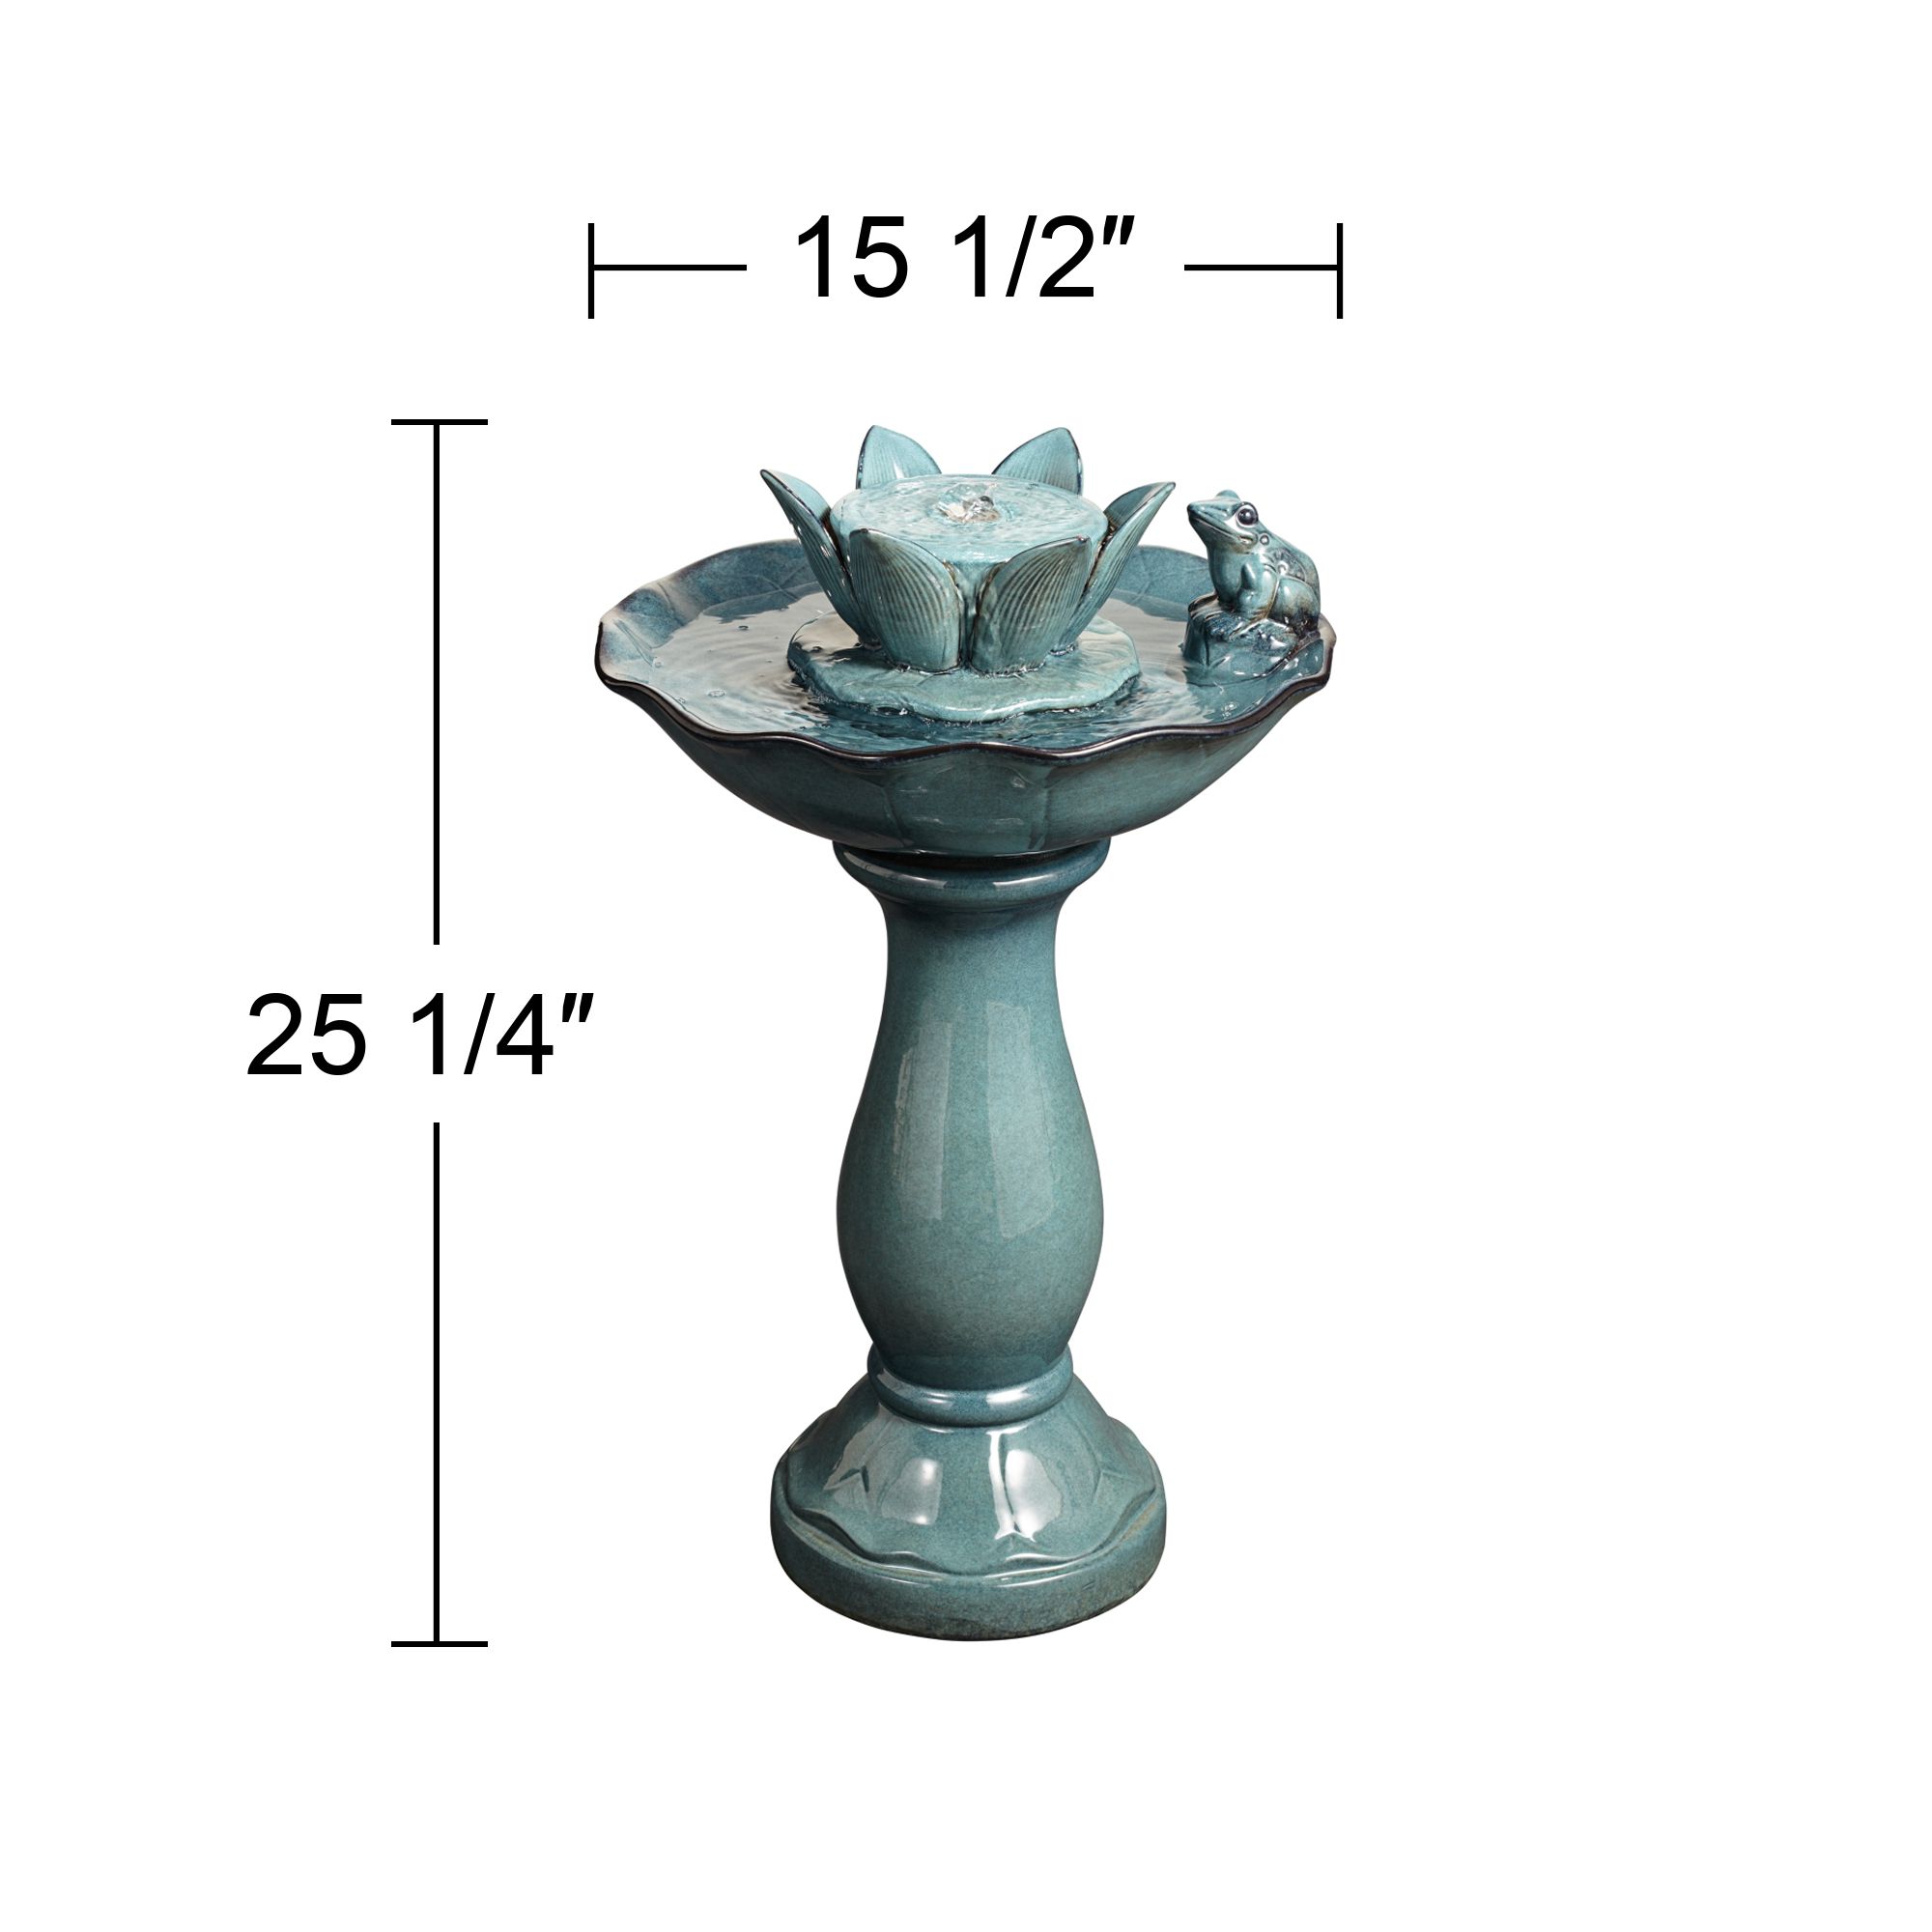 John Timberland Pleasant Pond Modern Bubbler Lotus Flower Outdoor Floor Water Fountain 25 1/4" for Yard Garden Patio Deck Porch House Exterior - image 4 of 9